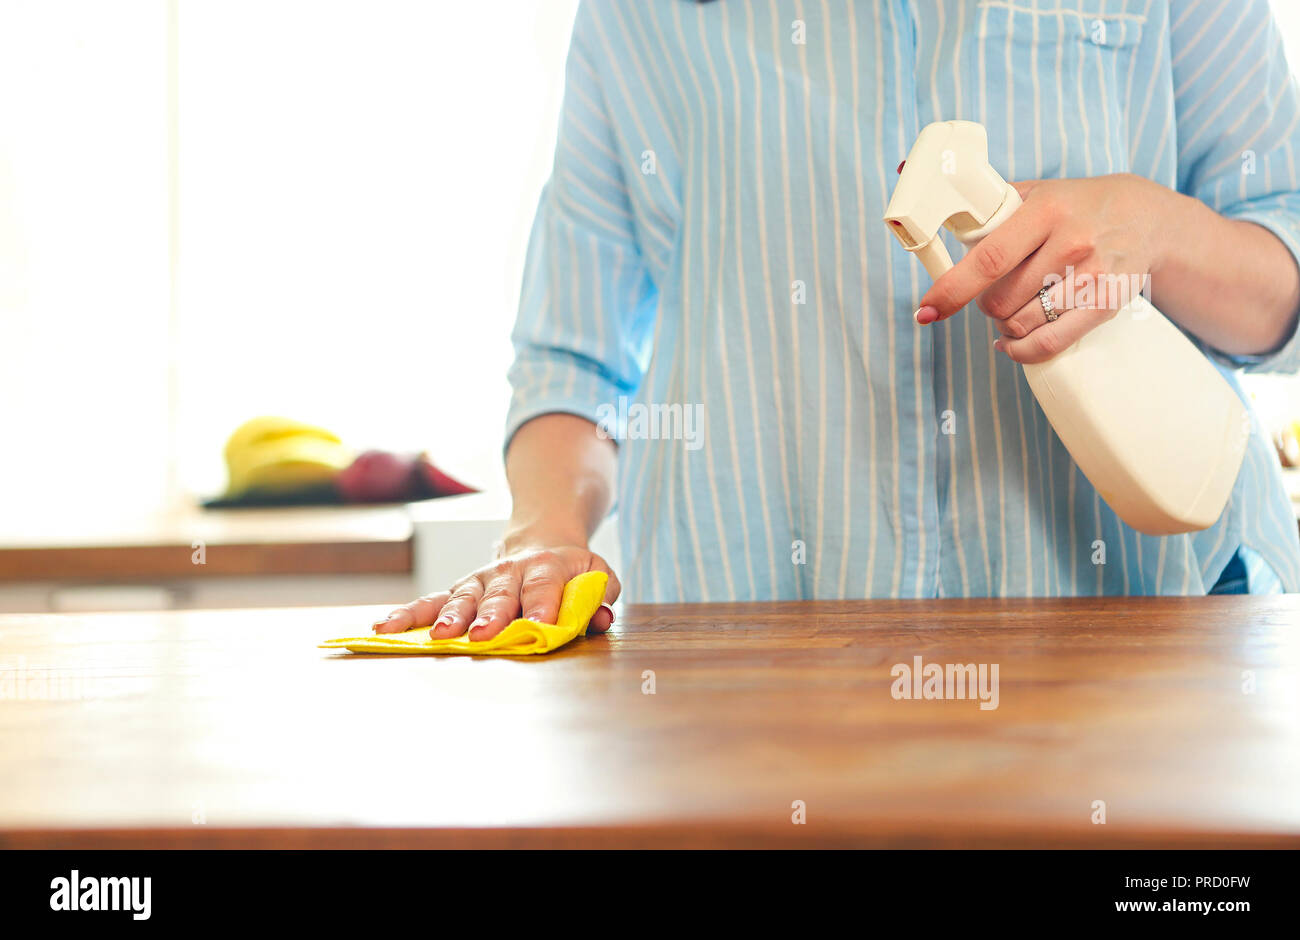 Conceptual Image Of Kitchen Cleaning Close Up Of Human